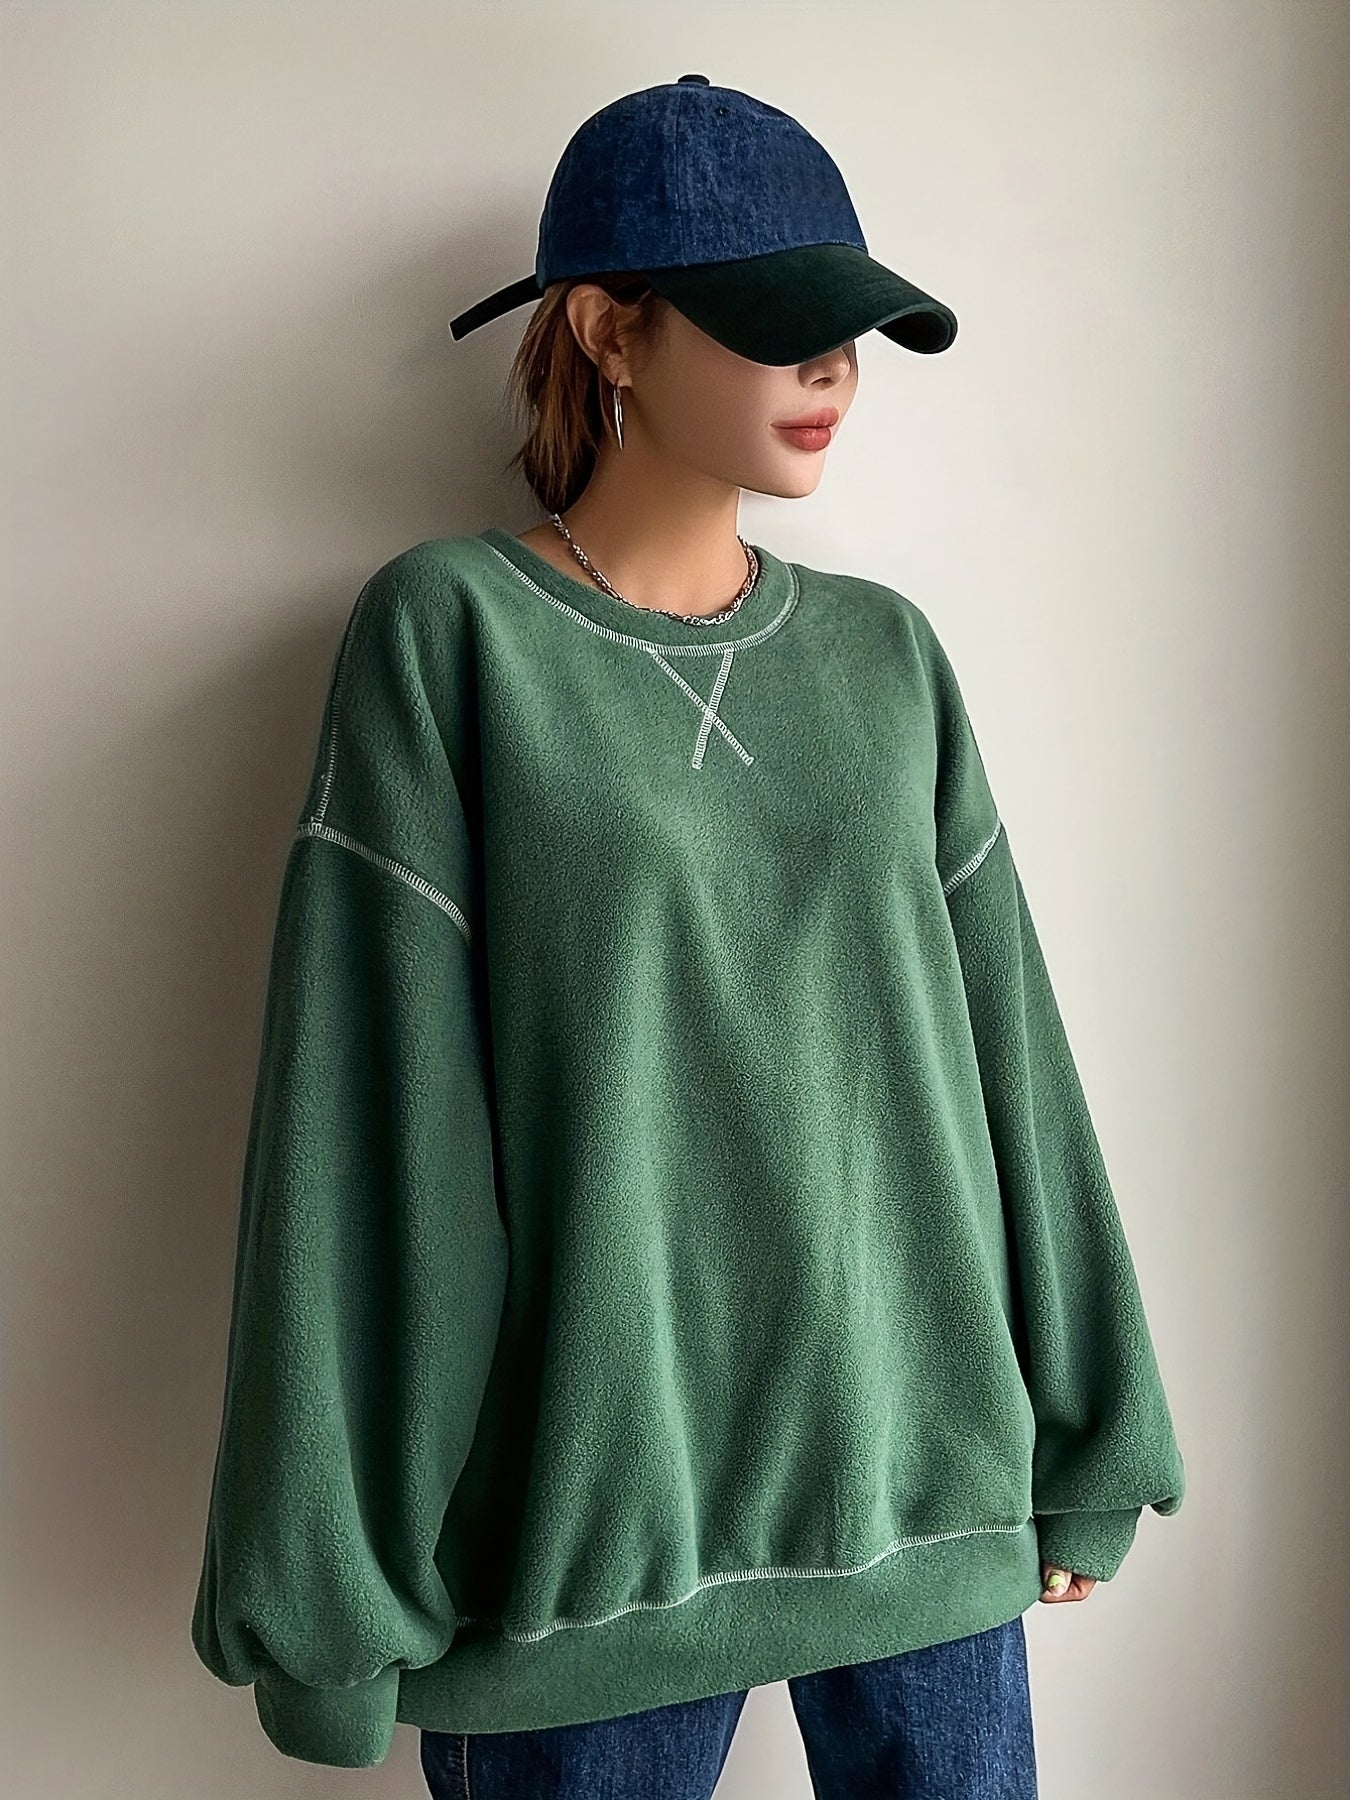 Letter Print Top-stitching Pullover Sweatshirt, Casual Long Sleeve Crew Neck Sweatshirt For Fall & Winter, Women's Clothing